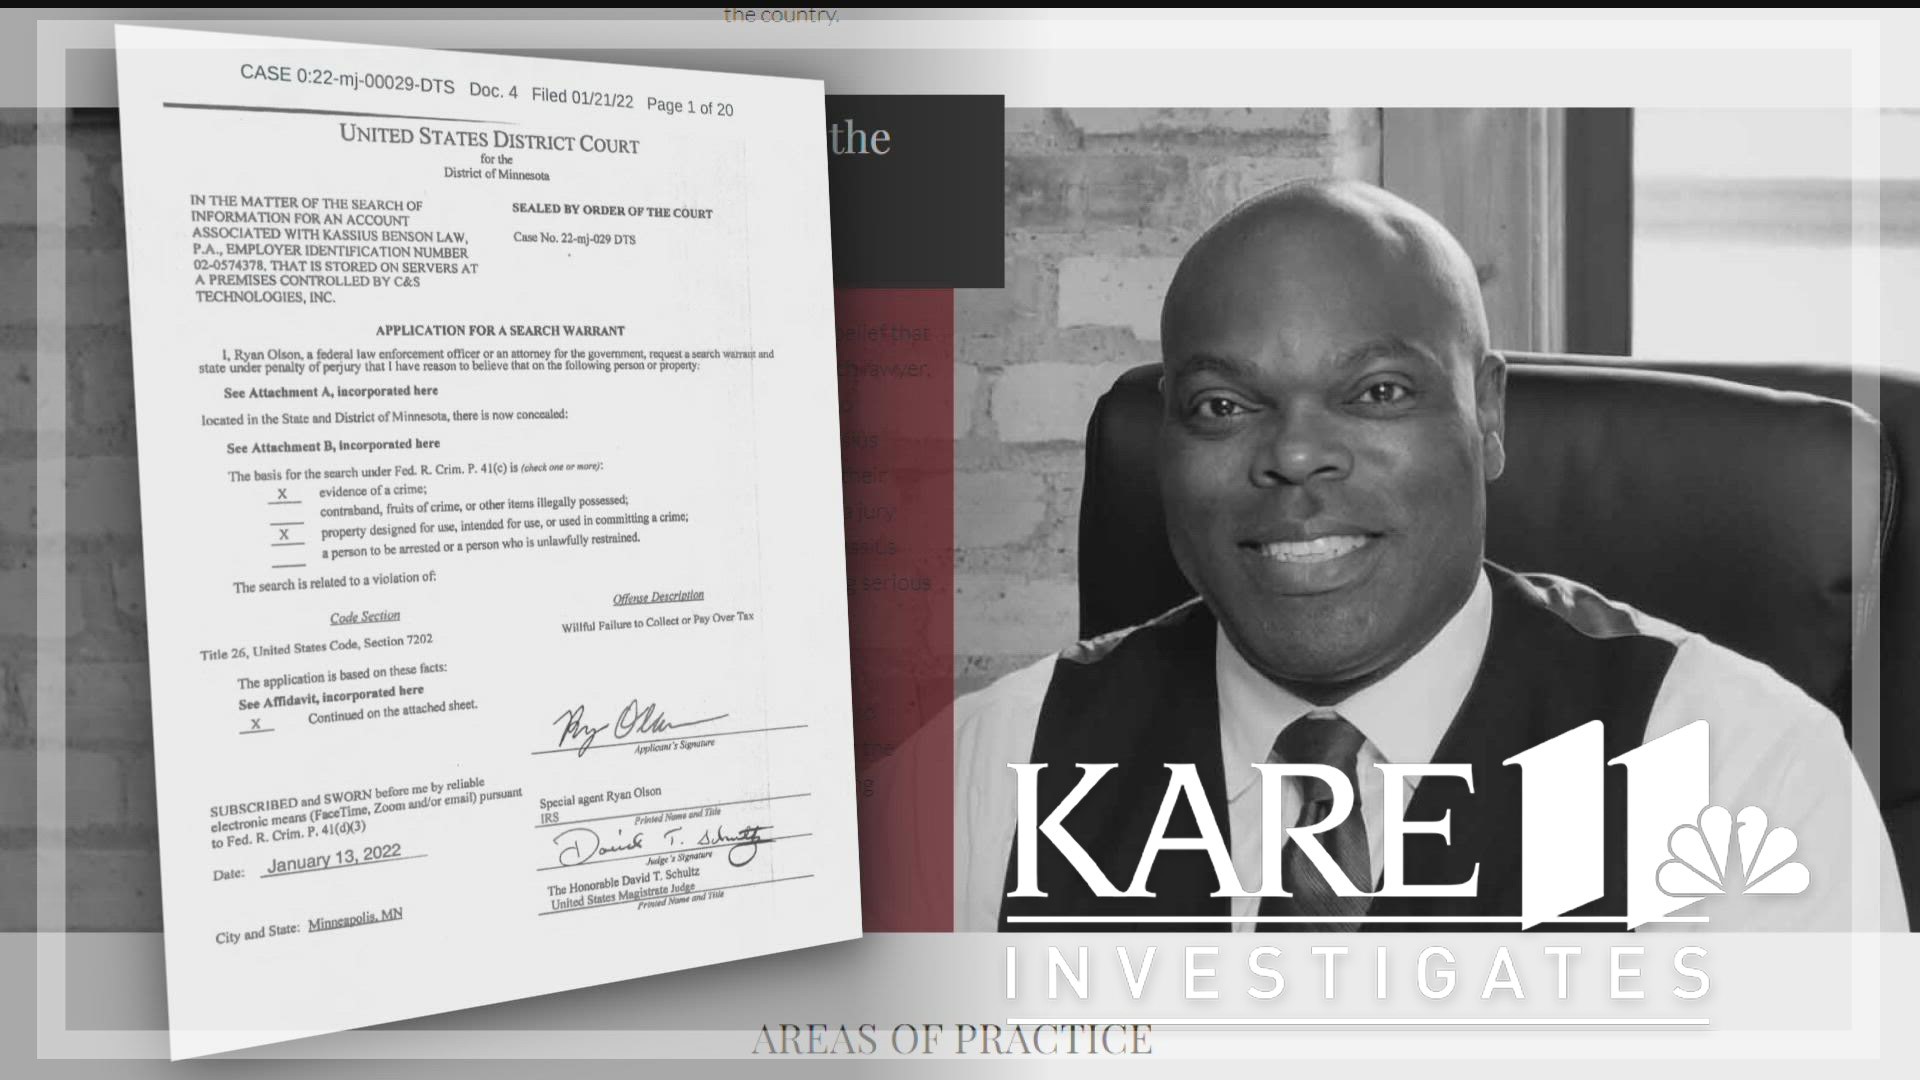 No criminal charges have been filed, but an IRS search warrant filed in January in federal court targeted payroll records of Kassius Benson’s private law firm.